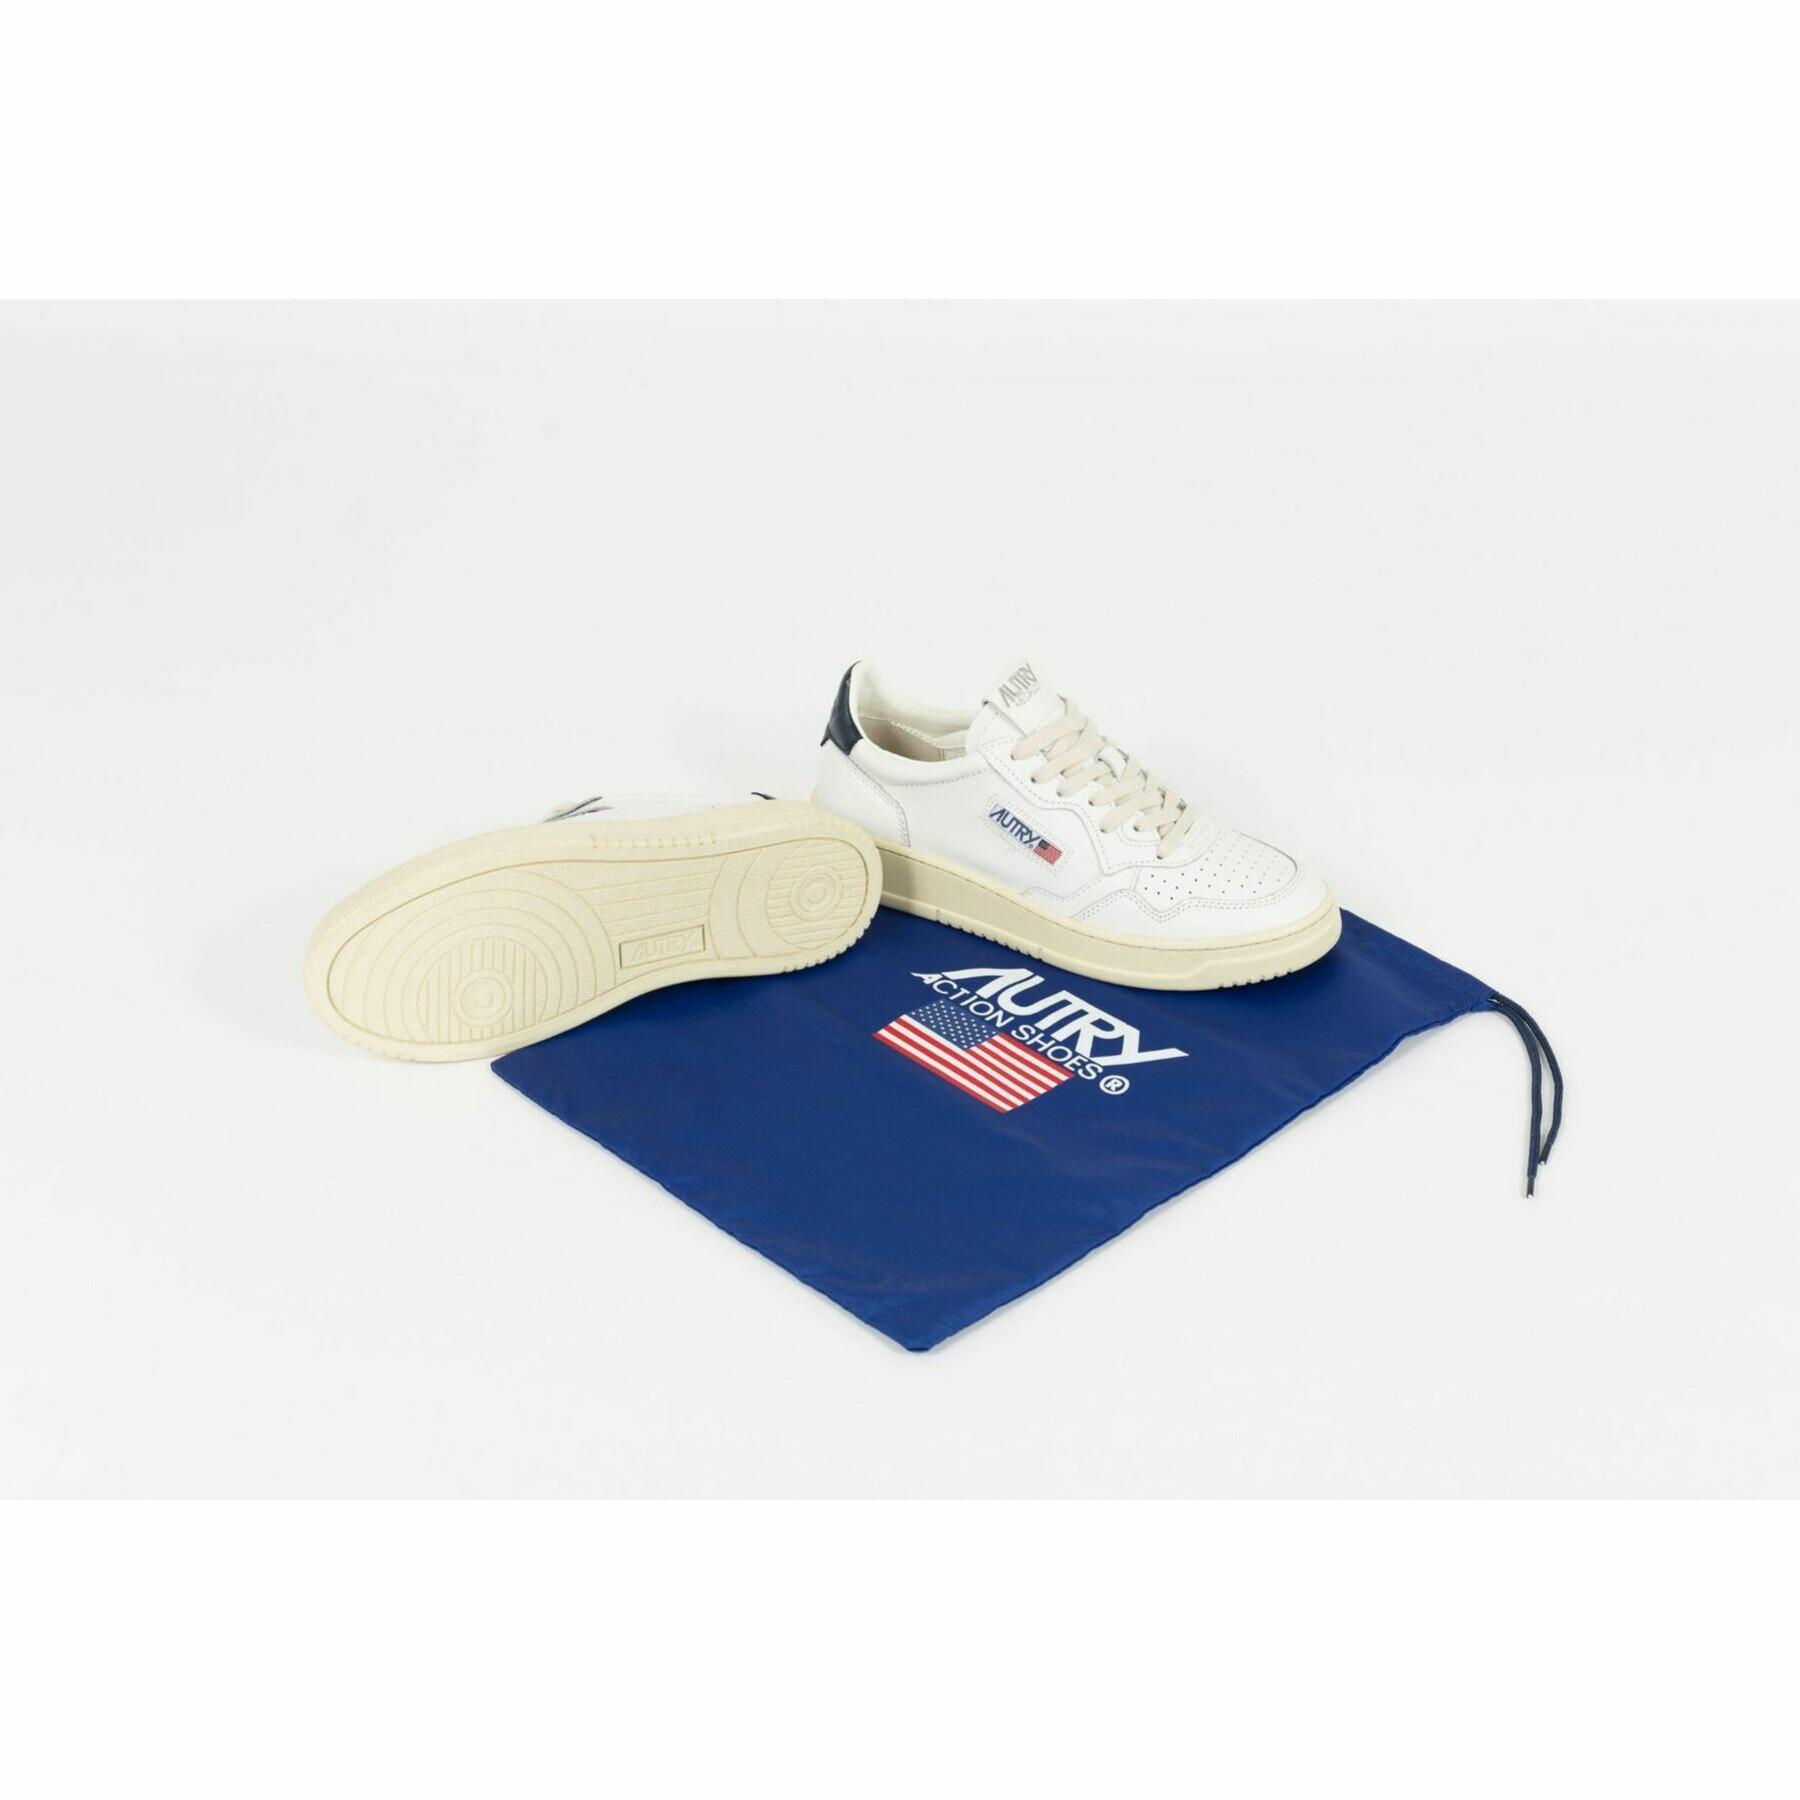 Sneakers Autry Medalist LL12 Leather White/Navy Blue